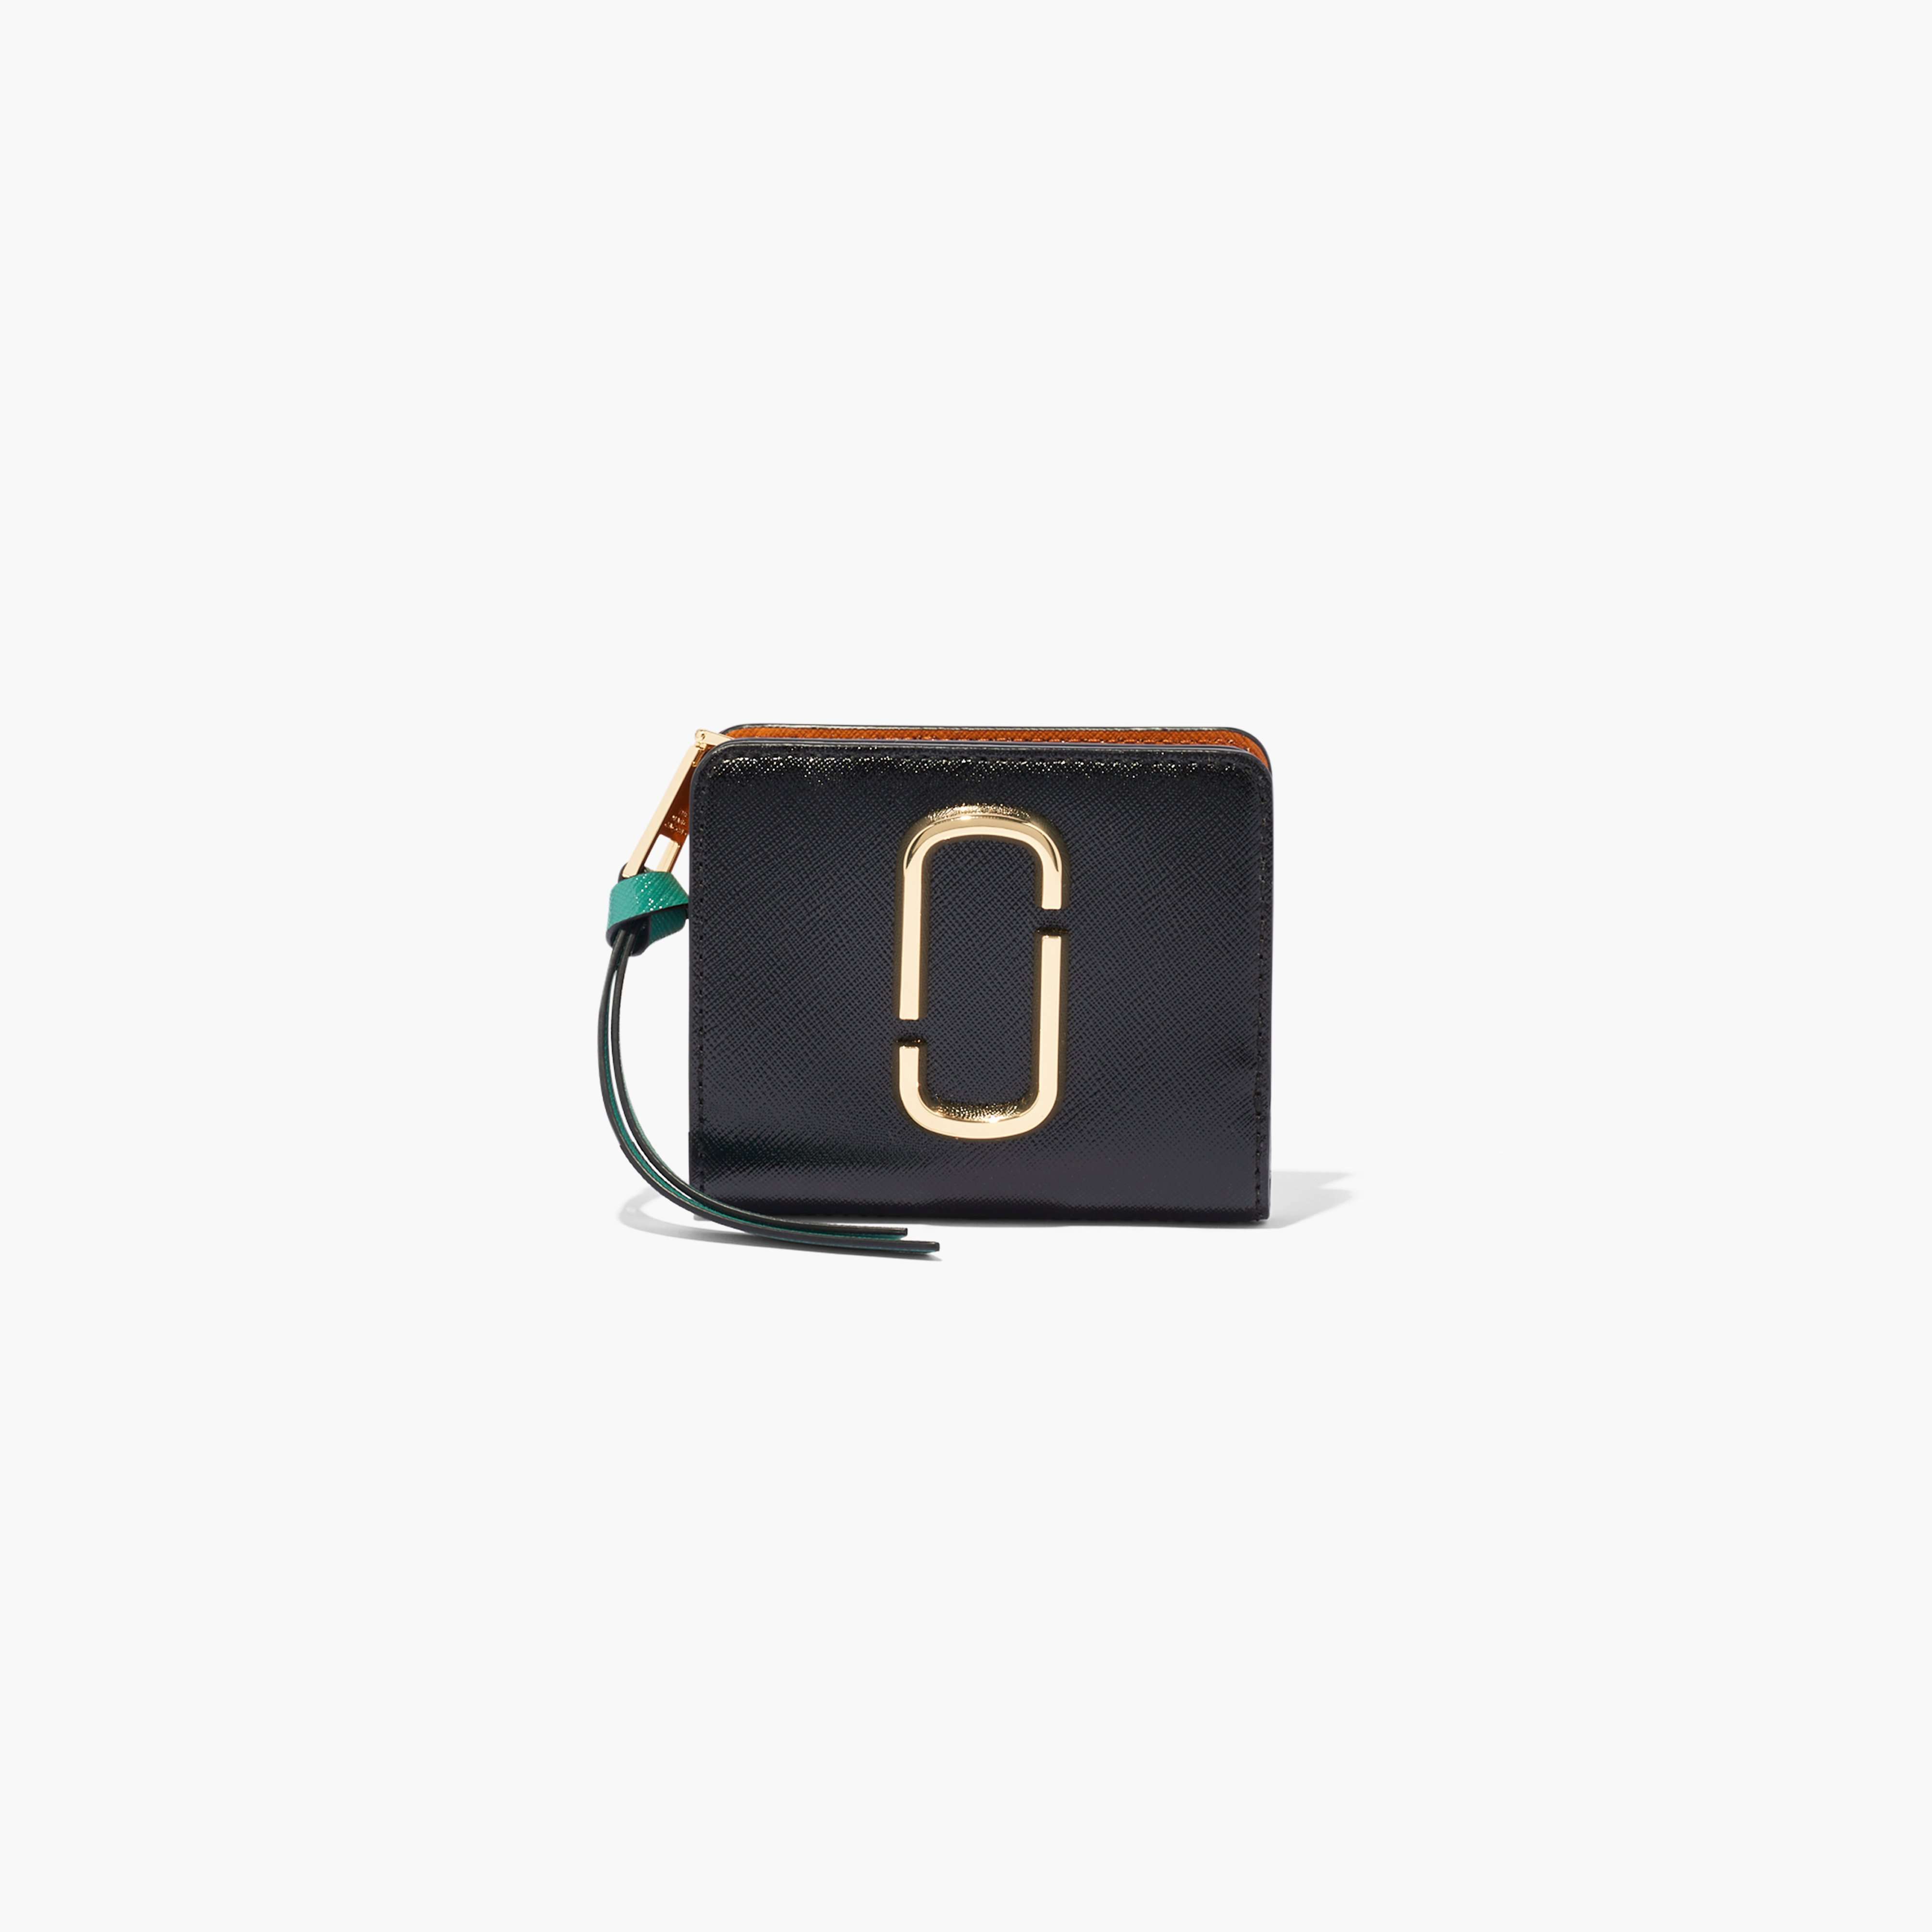 The Snapshot Mini Compact Wallet in Black/Honey Ginger Multi